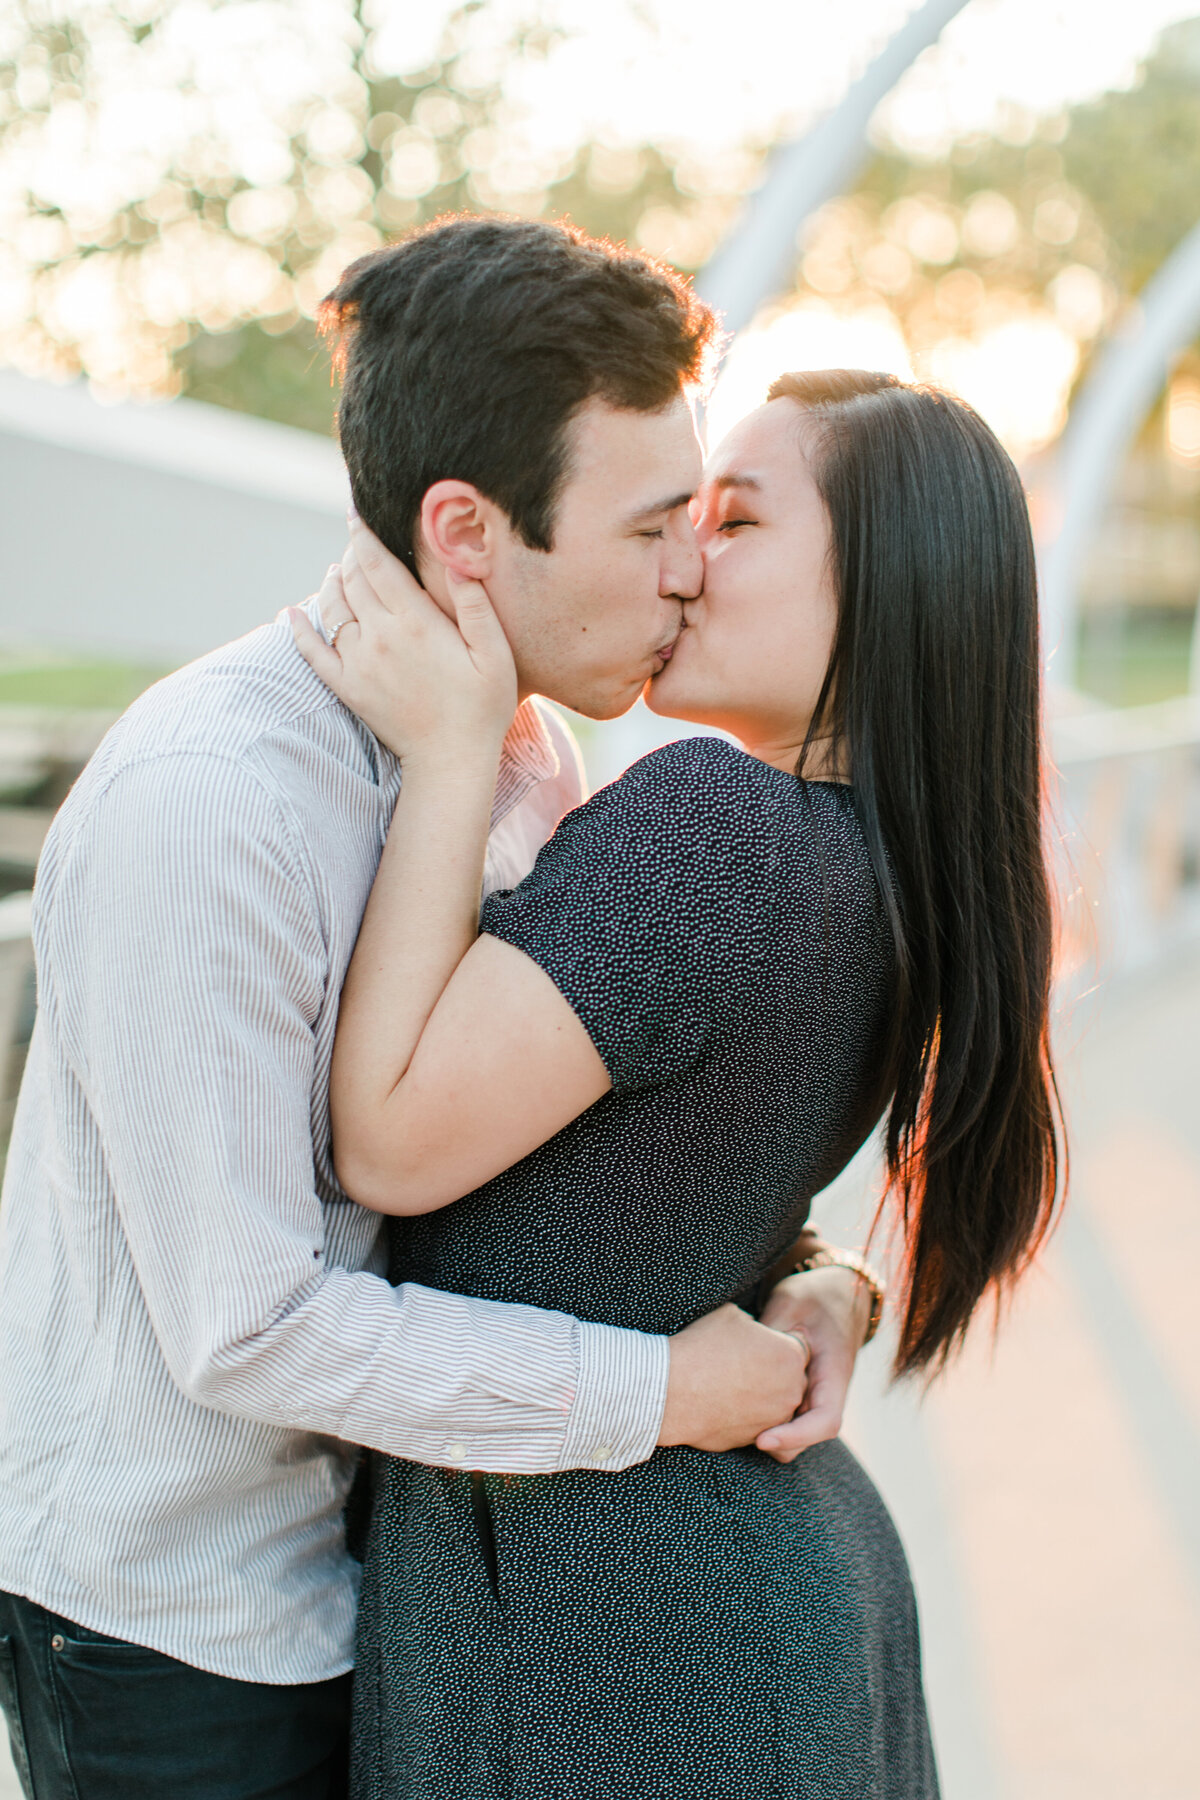 Becky_Collin_Navy_Yards_Park_The_Wharf_Washington_DC_Fall_Engagement_Session_AngelikaJohnsPhotography-8025